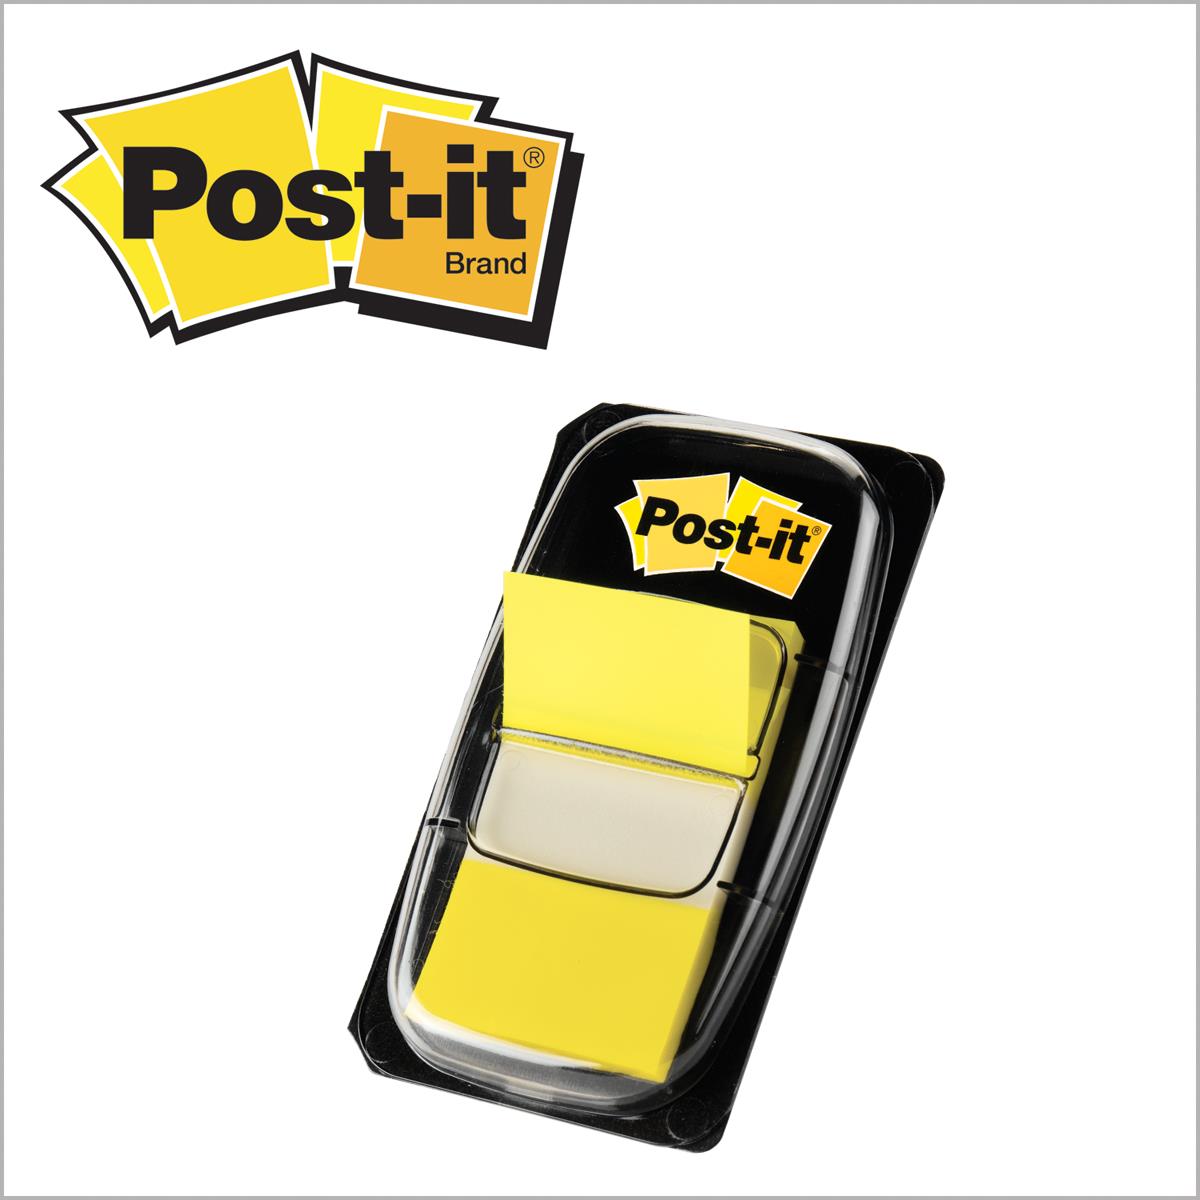 7010383983 - Post-it® Flags 680-YW12, 1 in. x 1.7 in. (25.4 mm x 43.2 mm) Canary Yellow 12 disp/box 4 bx/cs